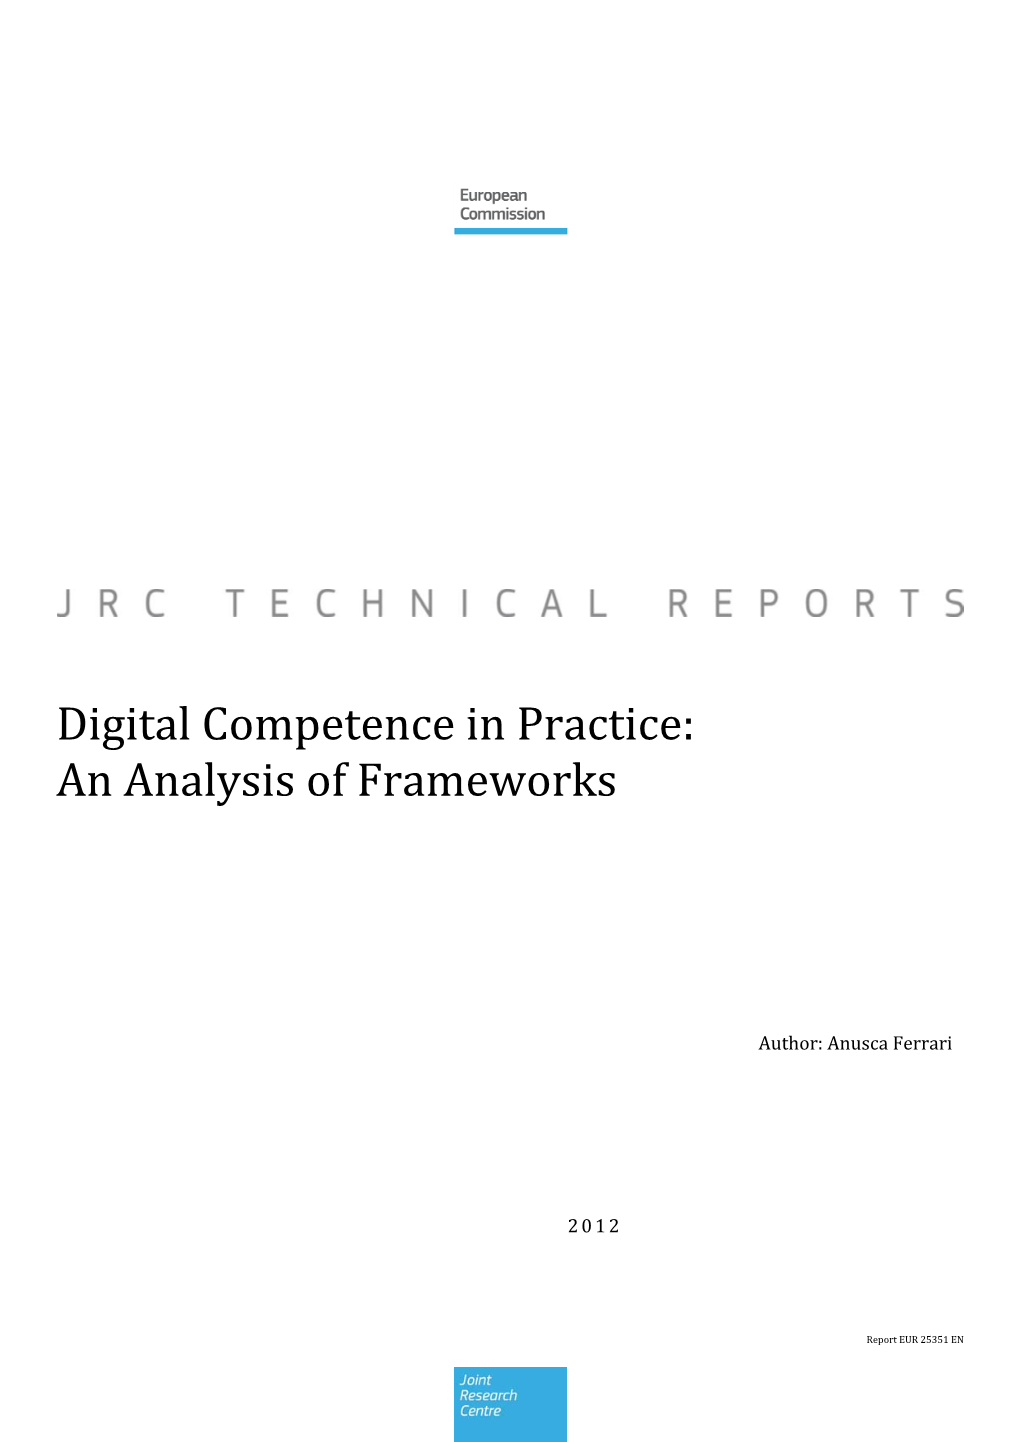 Digital Competence in Practice: an Analysis of Frameworks